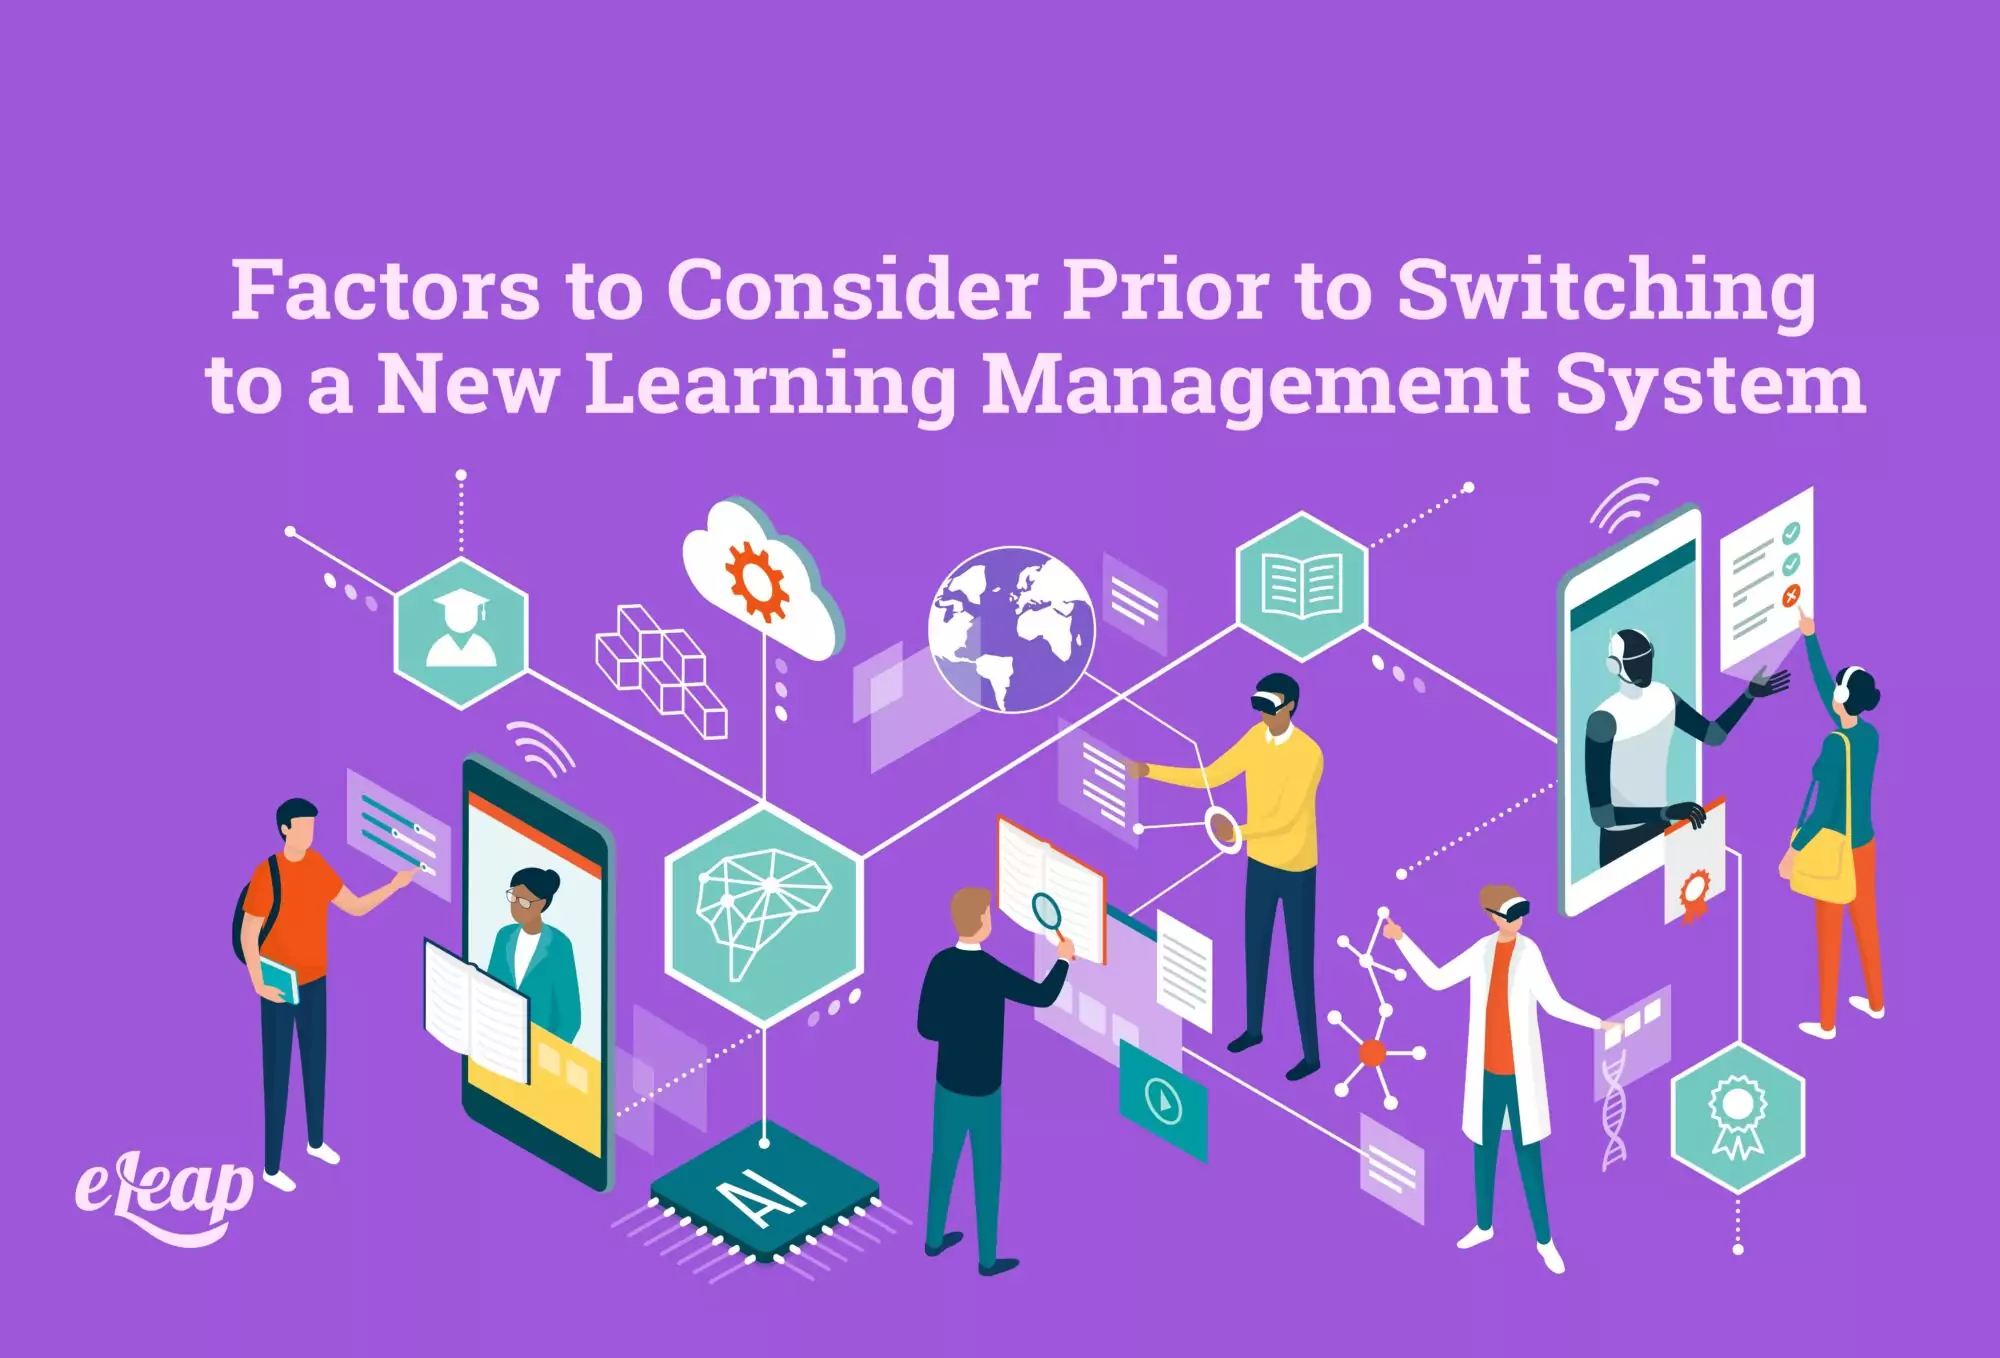 Factors to Consider Prior to Switching to a New Learning Management System